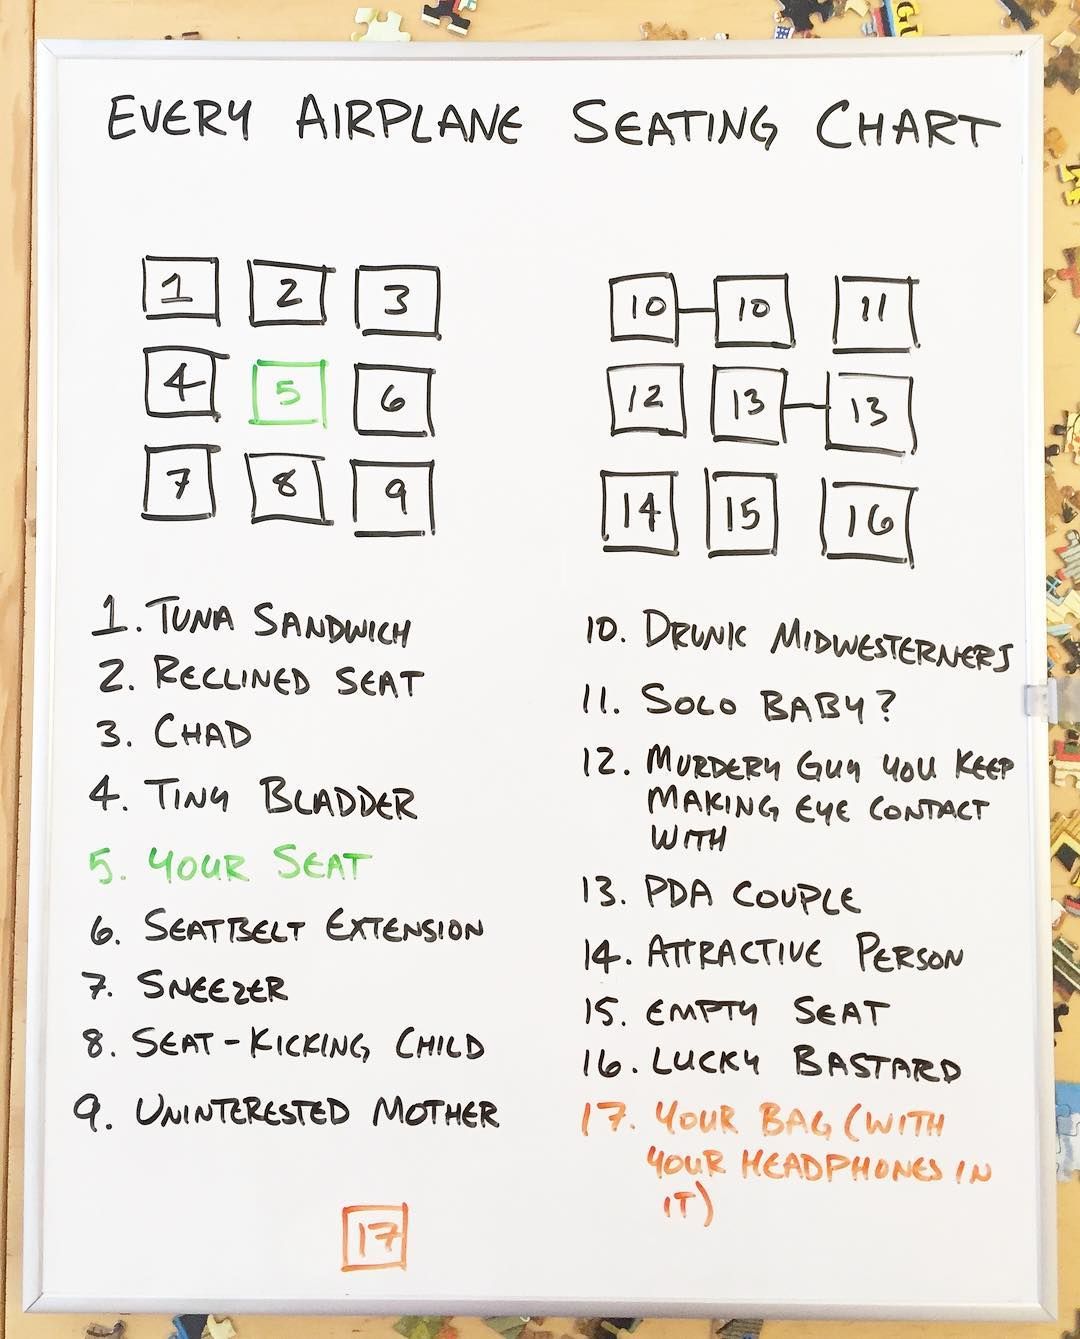 Every airplane seating chart